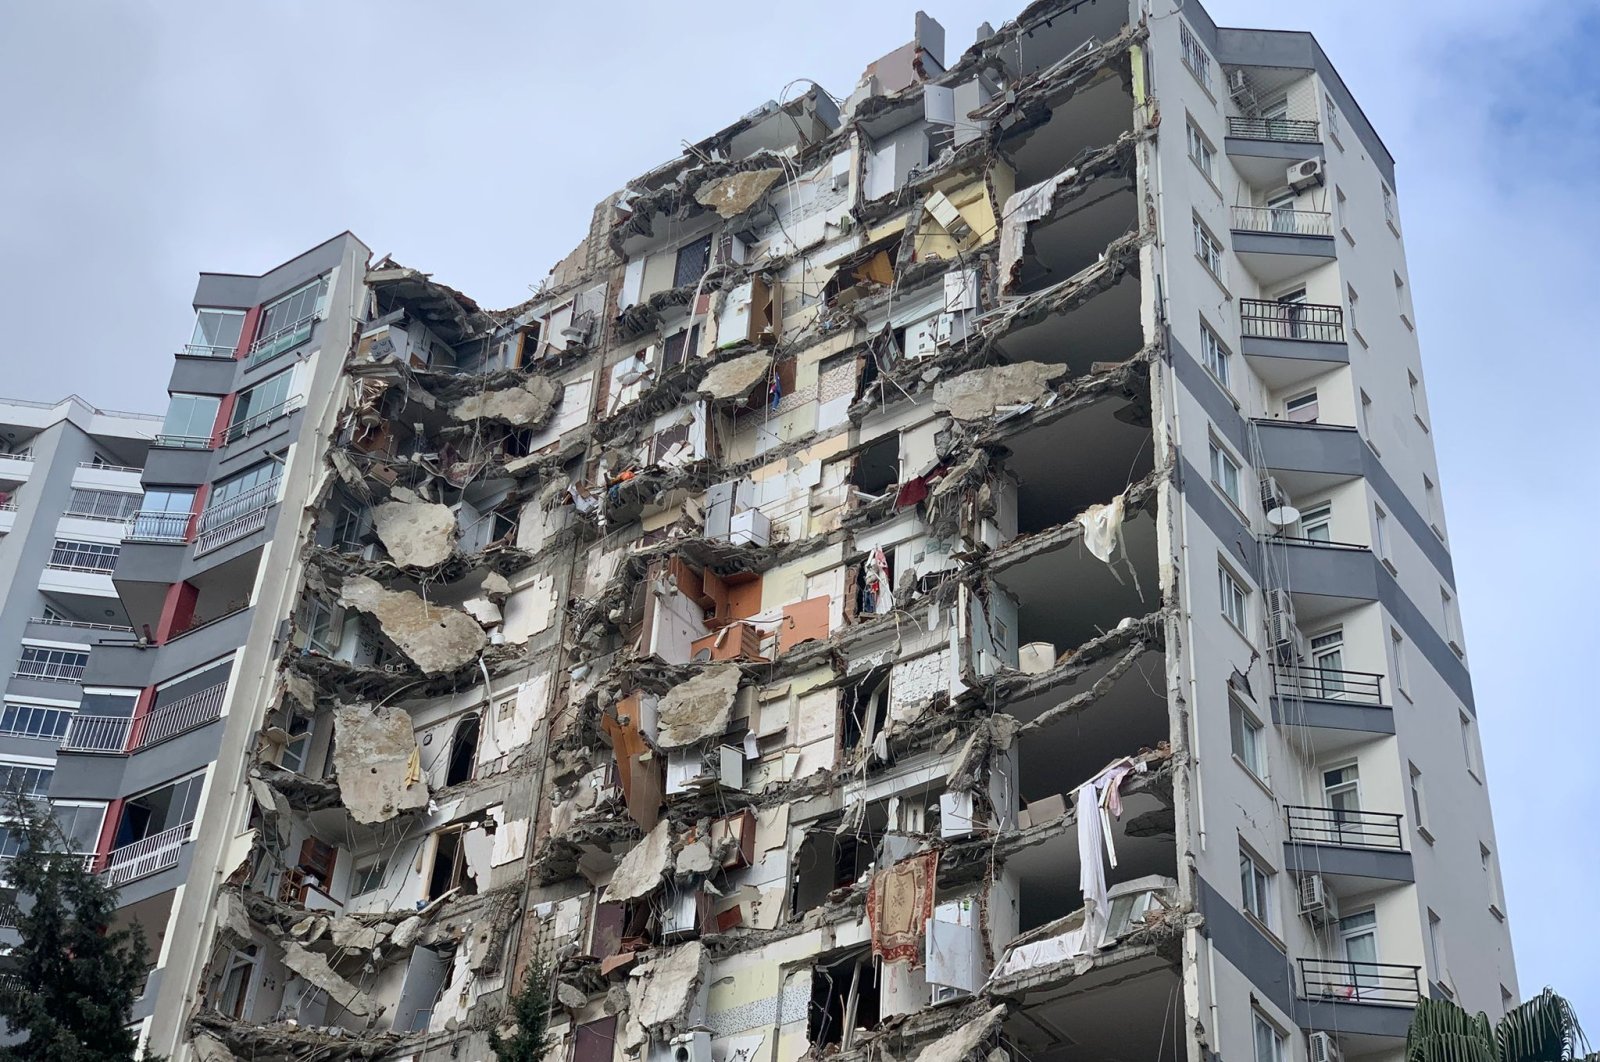 A building was damaged in the second earthquake on Feb. 6 in Adana, Türkiye, March 15, 2023. (DHA Photo)